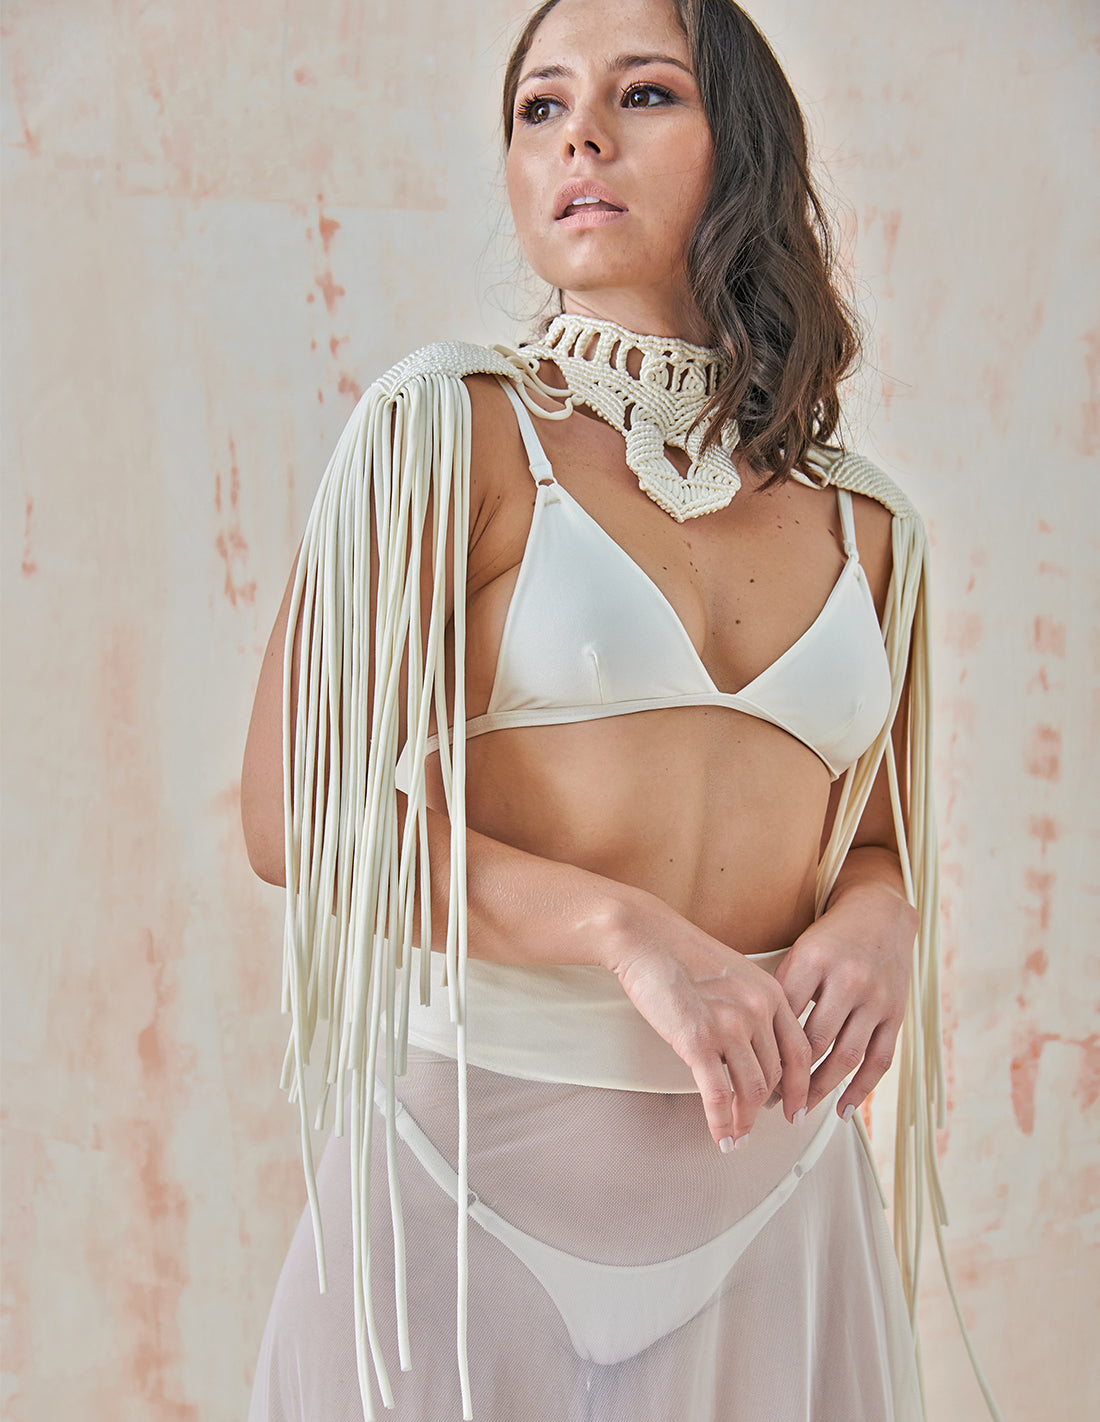 Warrior Neck Ivory. Neck With Hand Woven Macramé In Ivory. Entreaguas